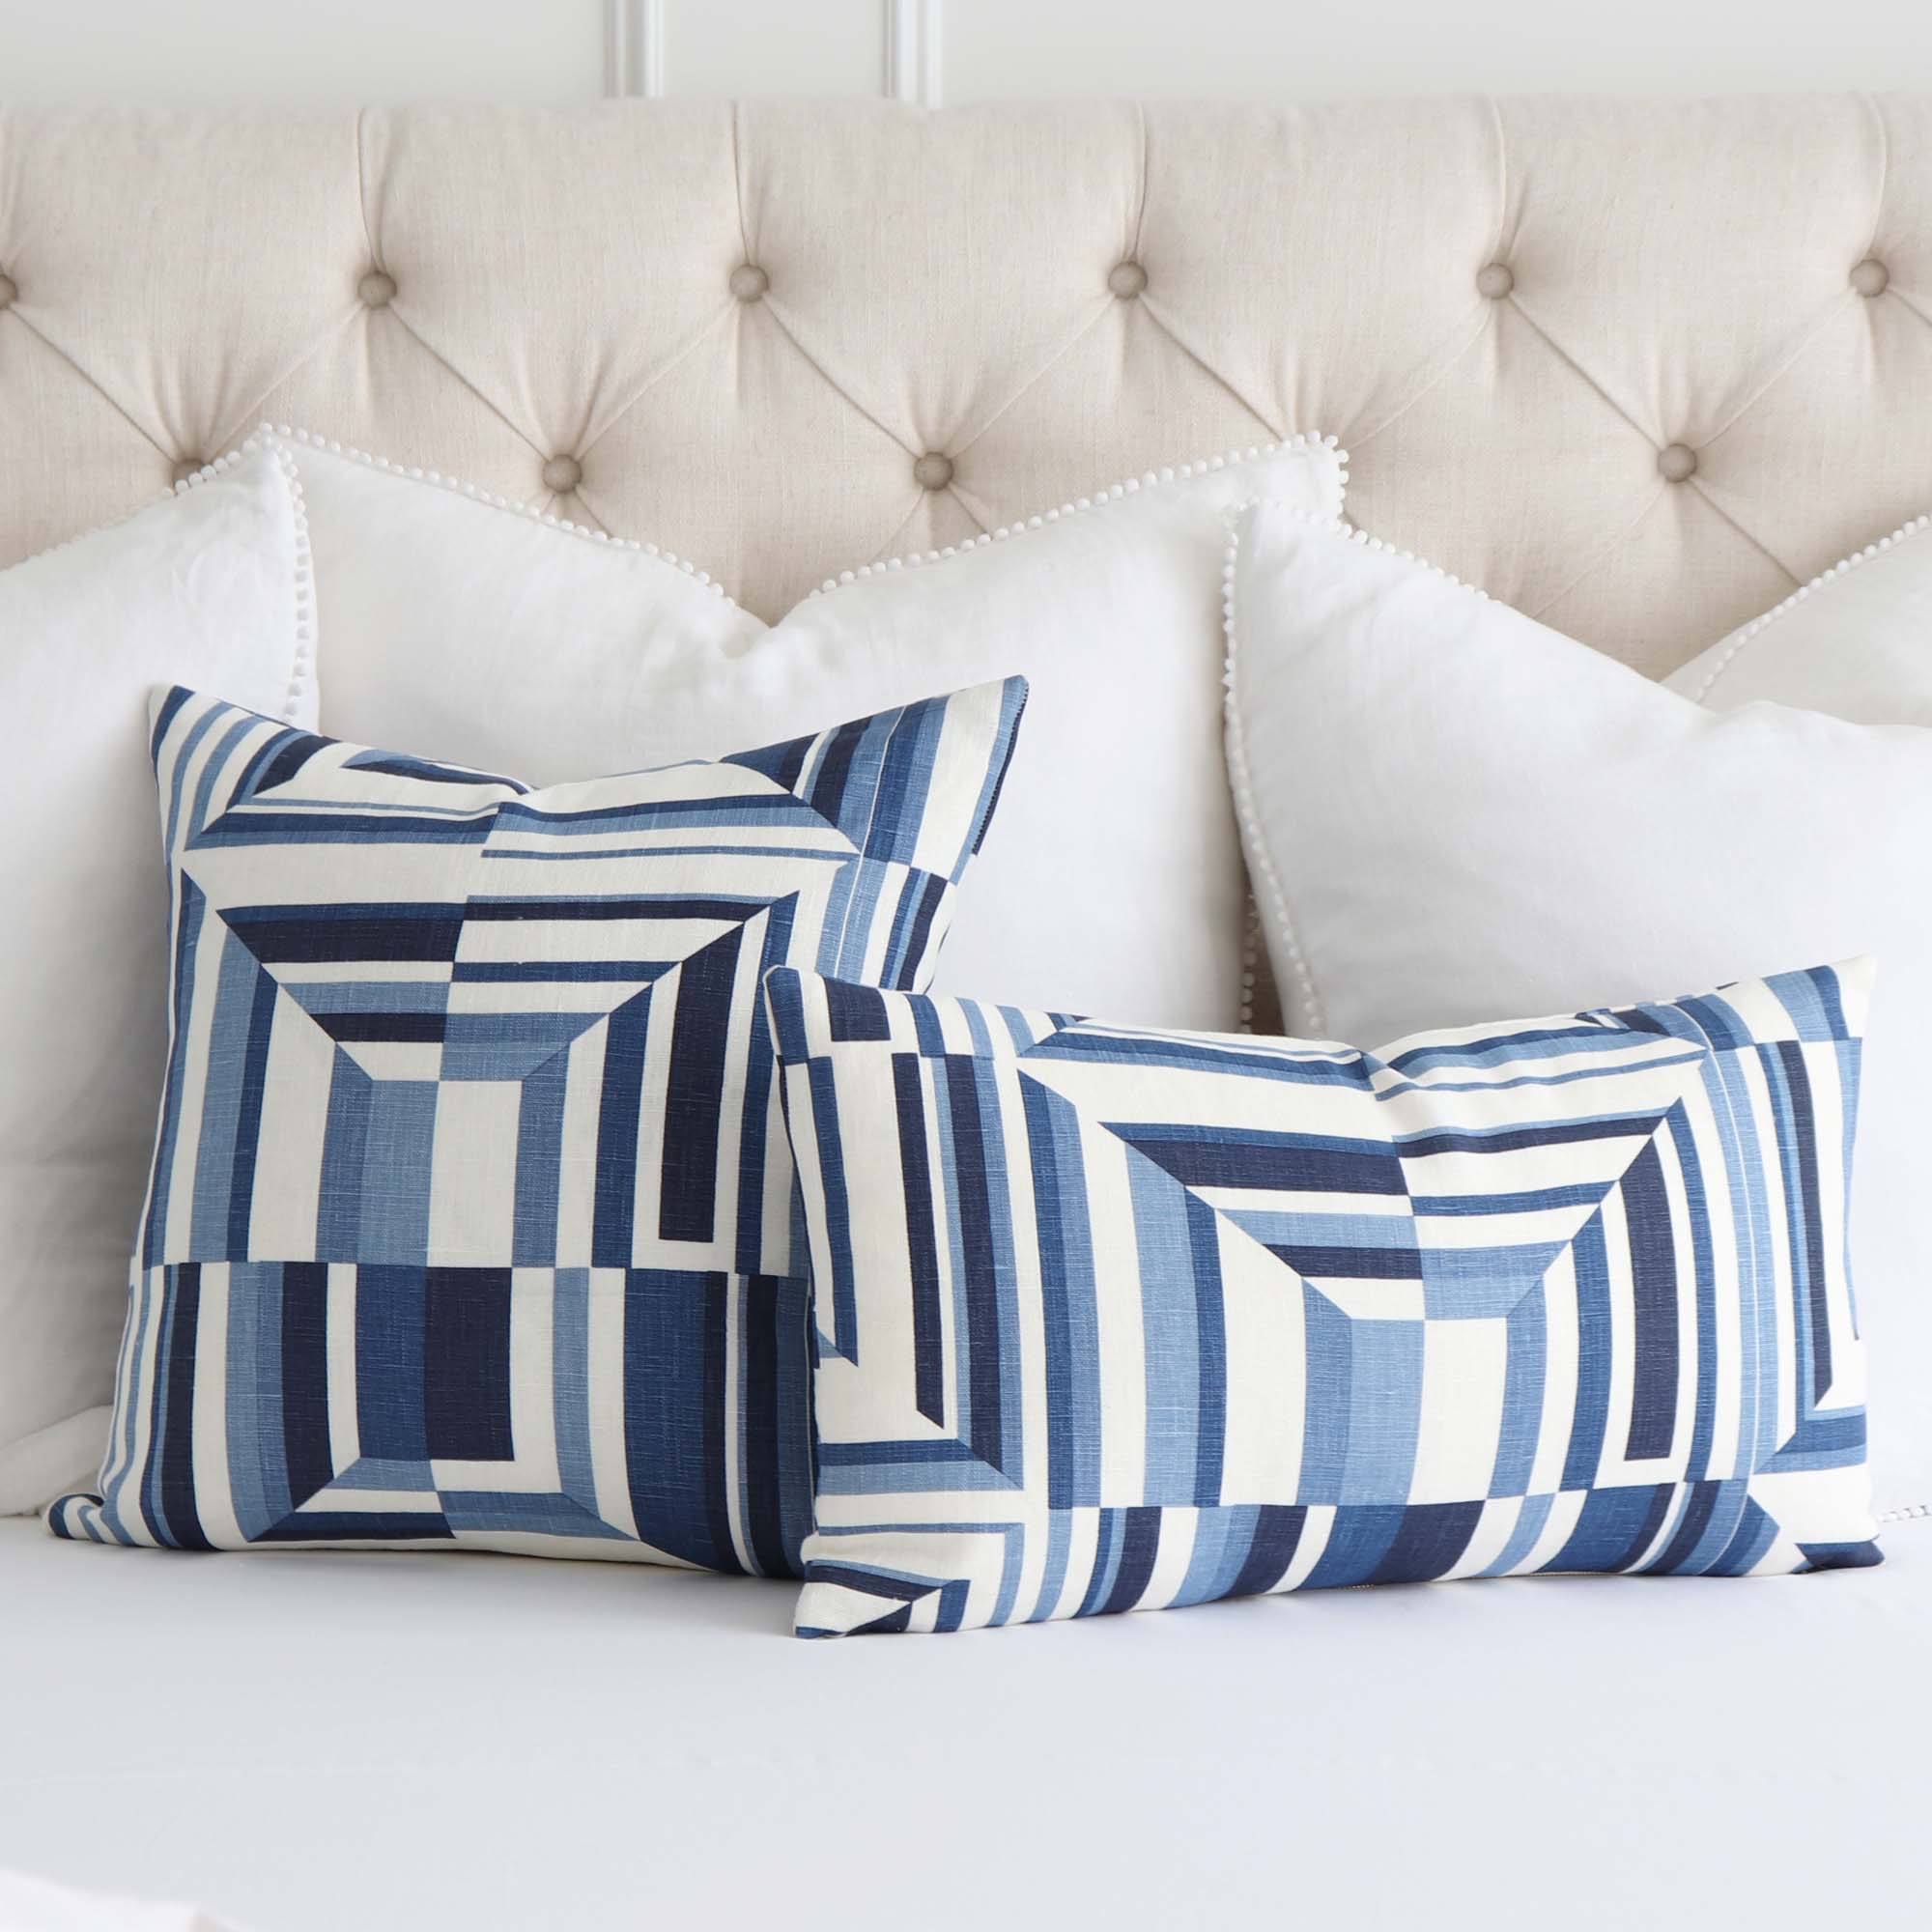 Thibaut Cubism Geometric Blue and White Stripes Linen Designer Luxury Decorative Throw Pillow Cover on Queen Bed with Big White Euro Shams